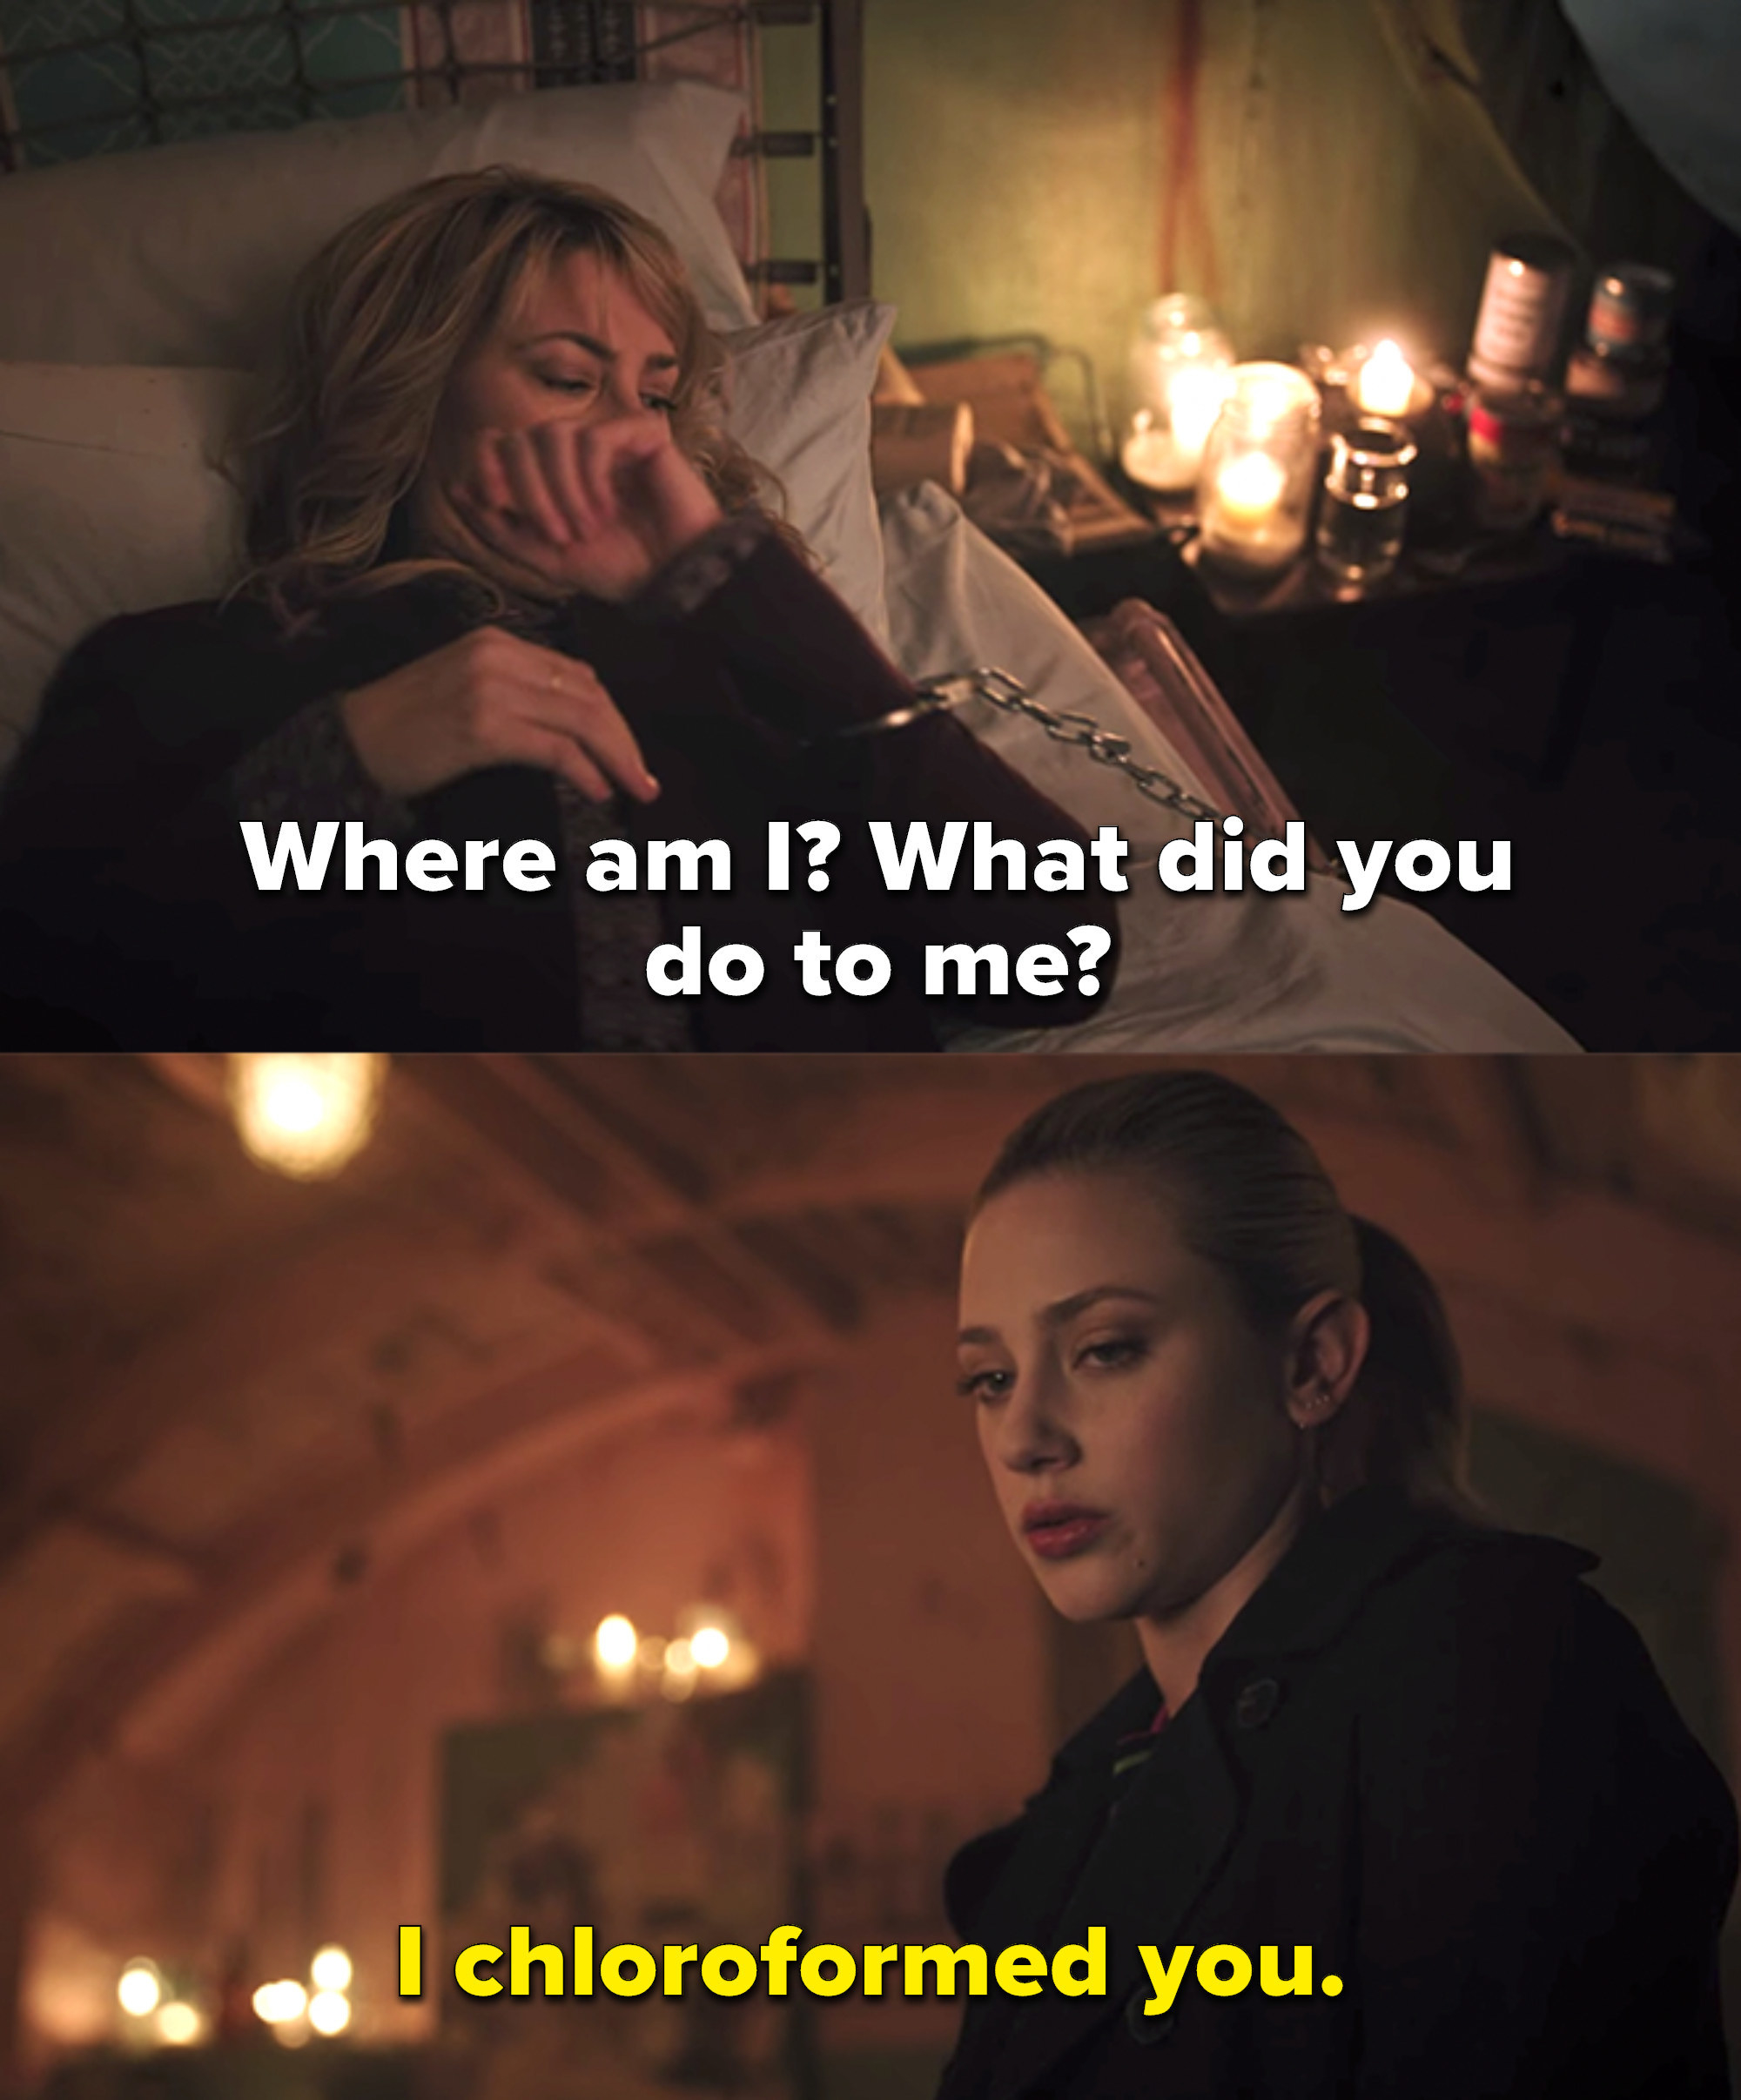 Betty&#x27;s mom asking where she is and Betty saying she chloroformed her